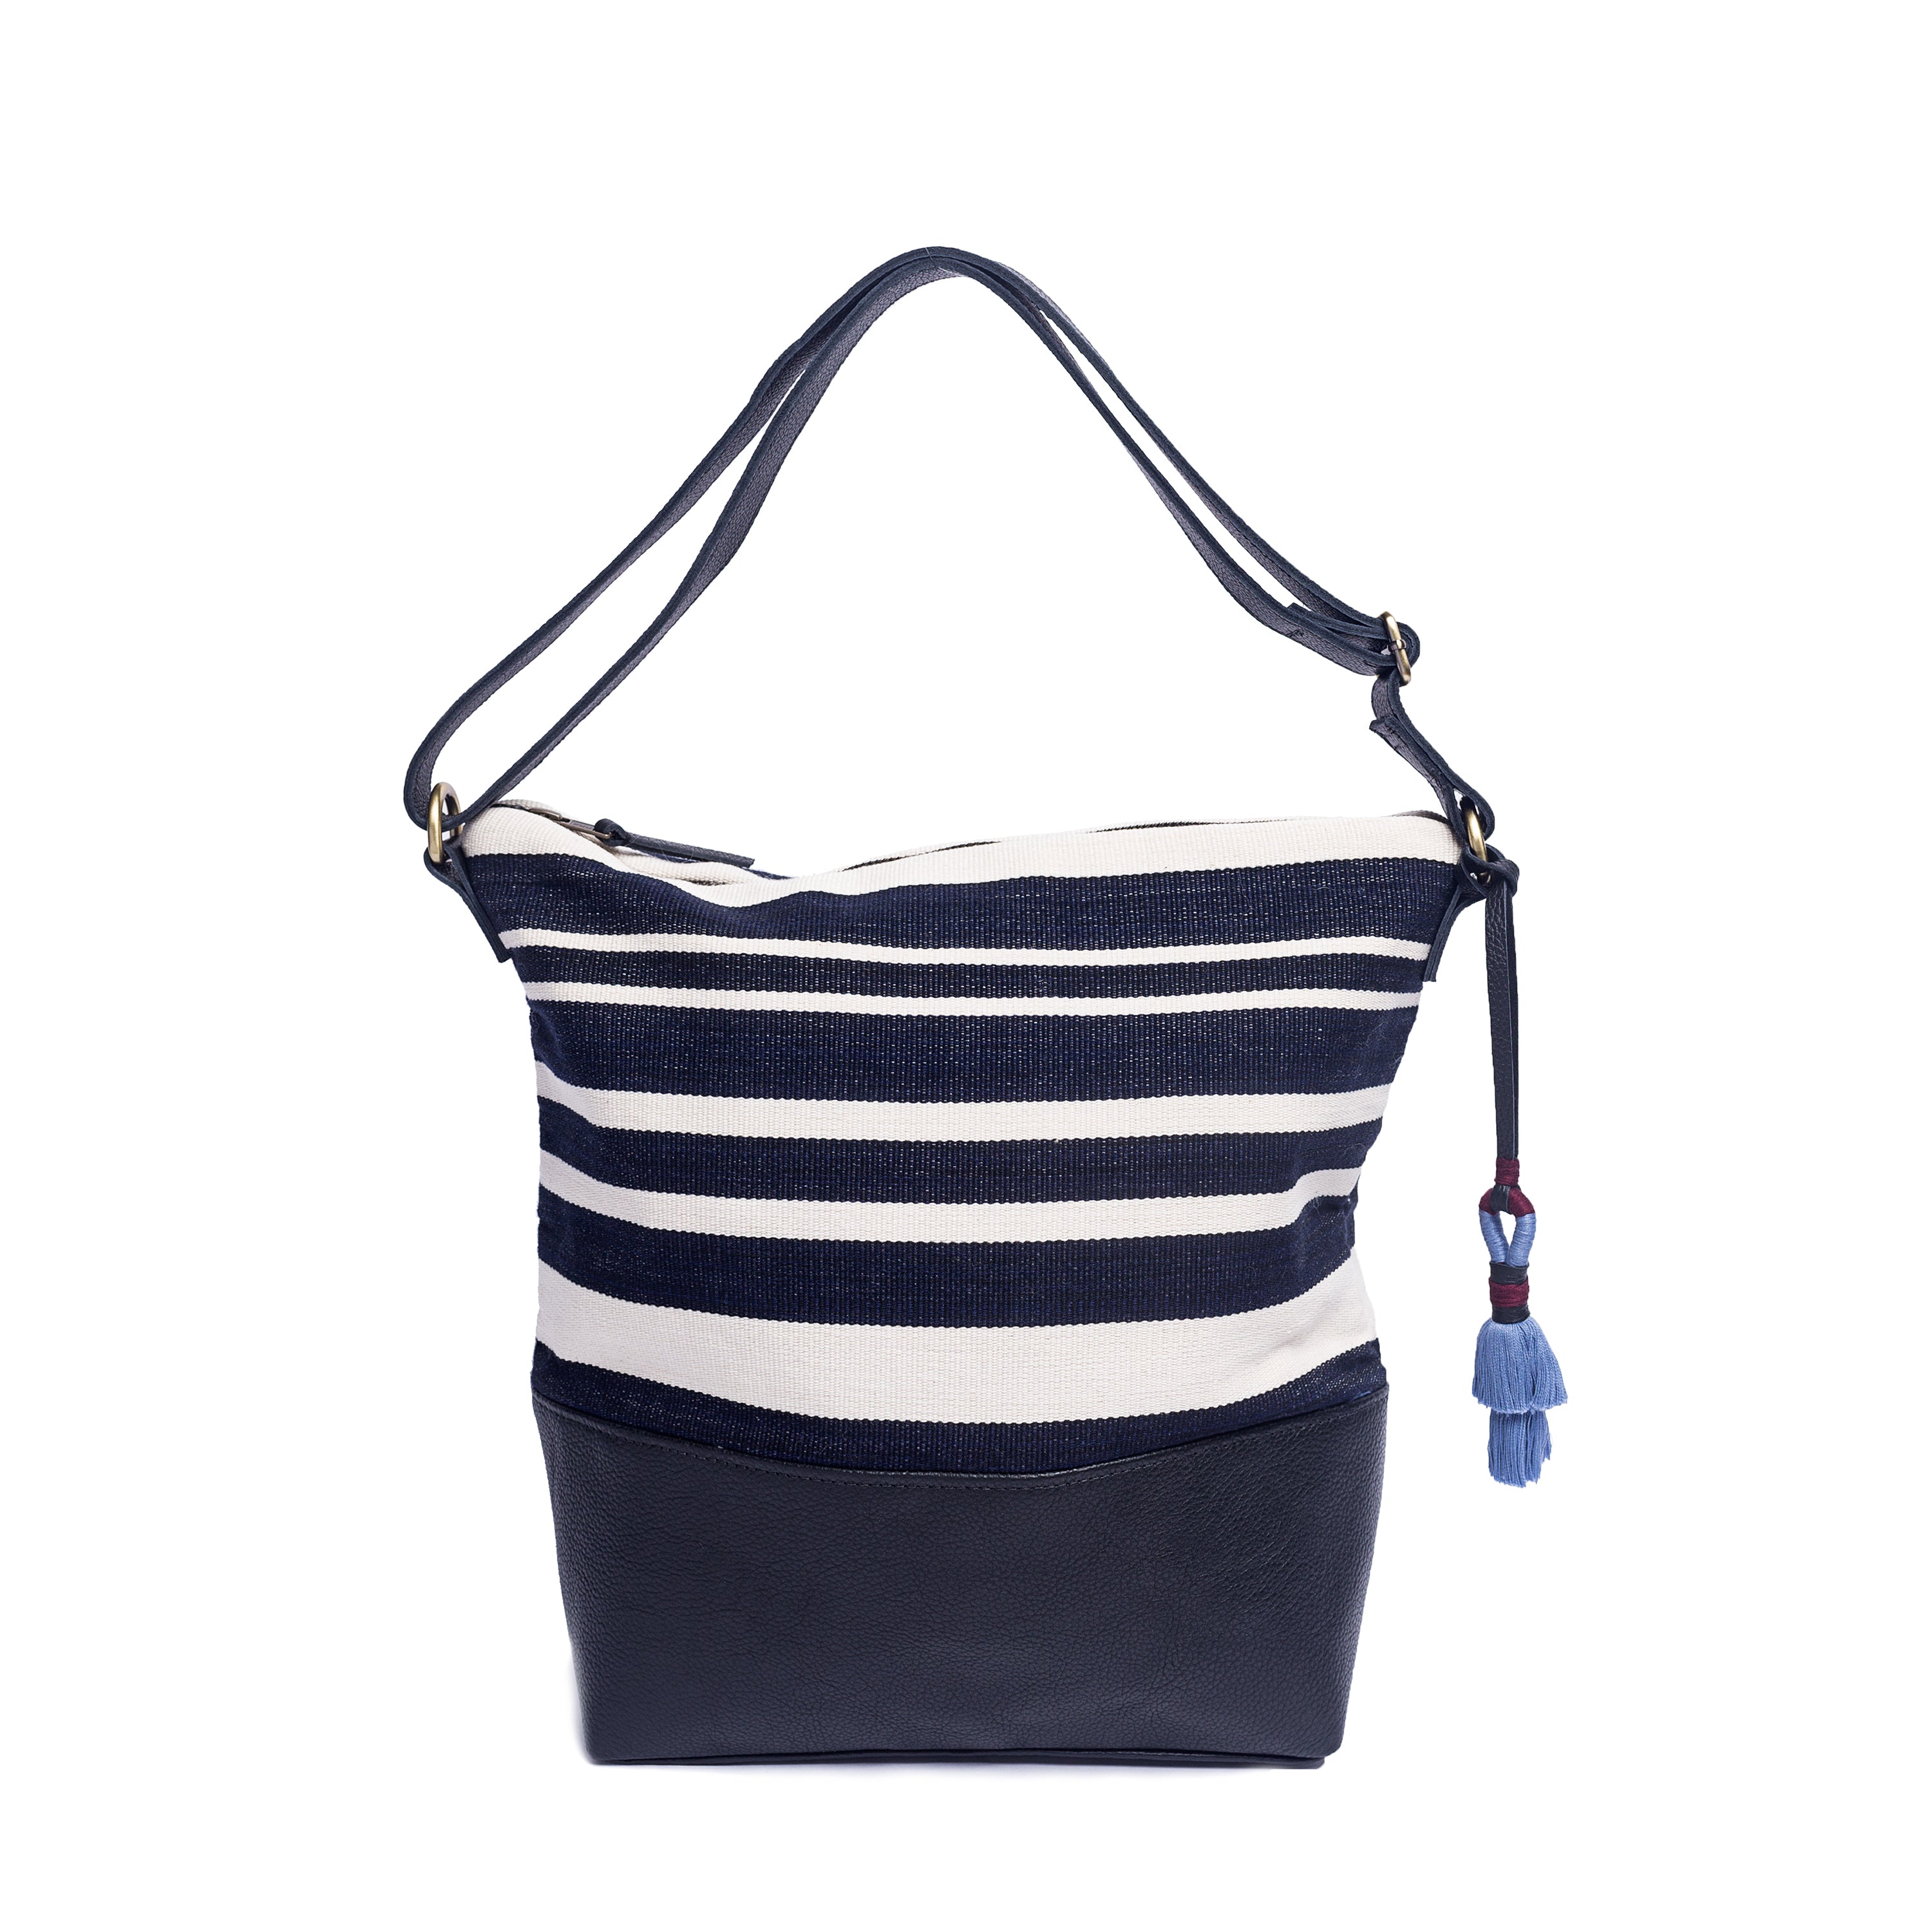 Hand Woven Artisan Lidia Hobo Handwoven Shoulder Bag. The Midnight Black pattern has vertical navy blue and white stripes. It has a navy adjustable leather strap, a leather bottom lining, and a blue tassel.